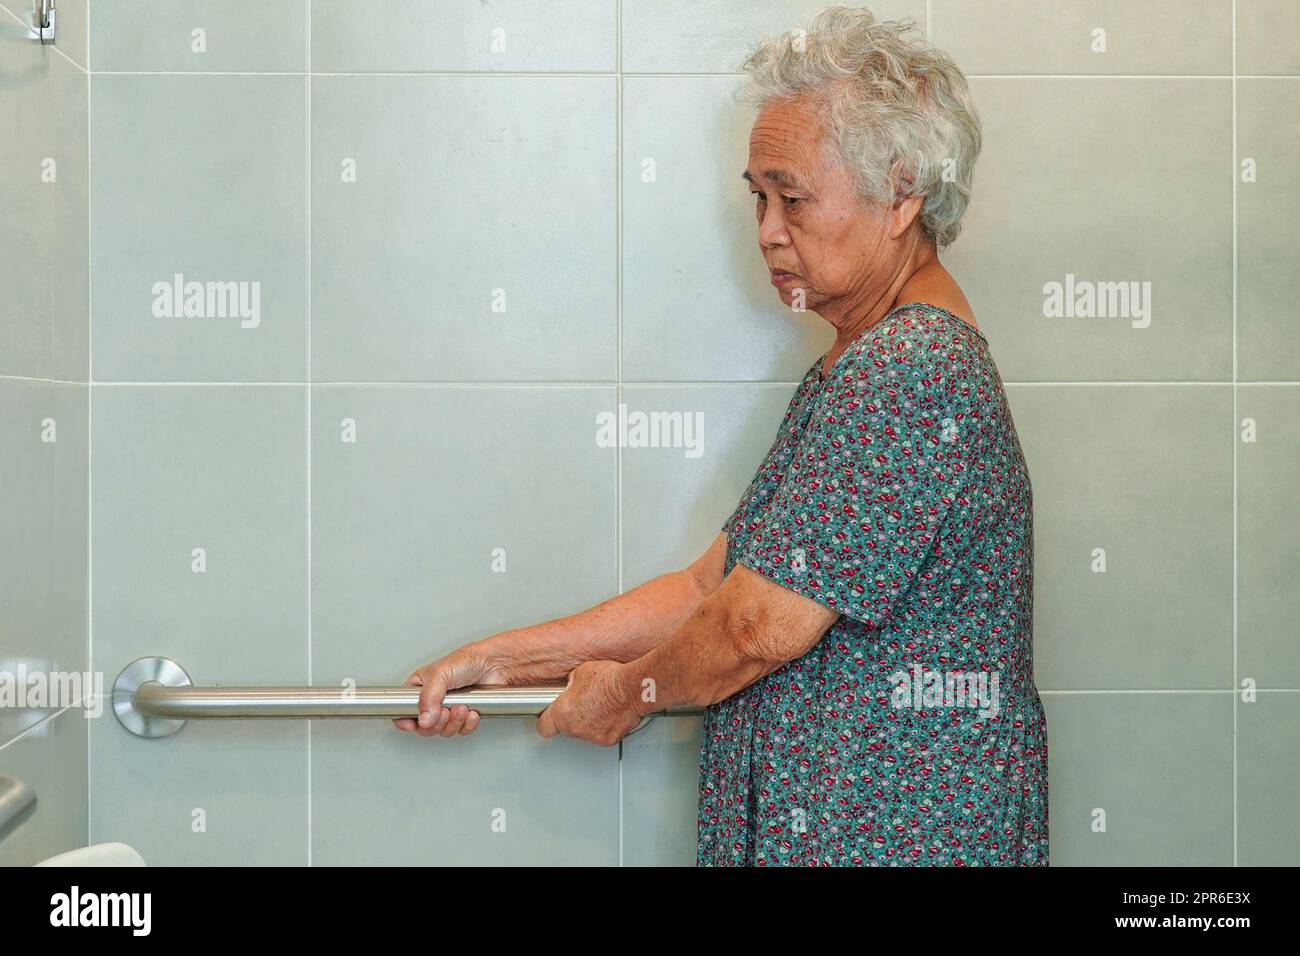 Asian elderly old woman patient use toilet support rail in bathroom, handrail safety grab bar, security in nursing hospital. Stock Photo